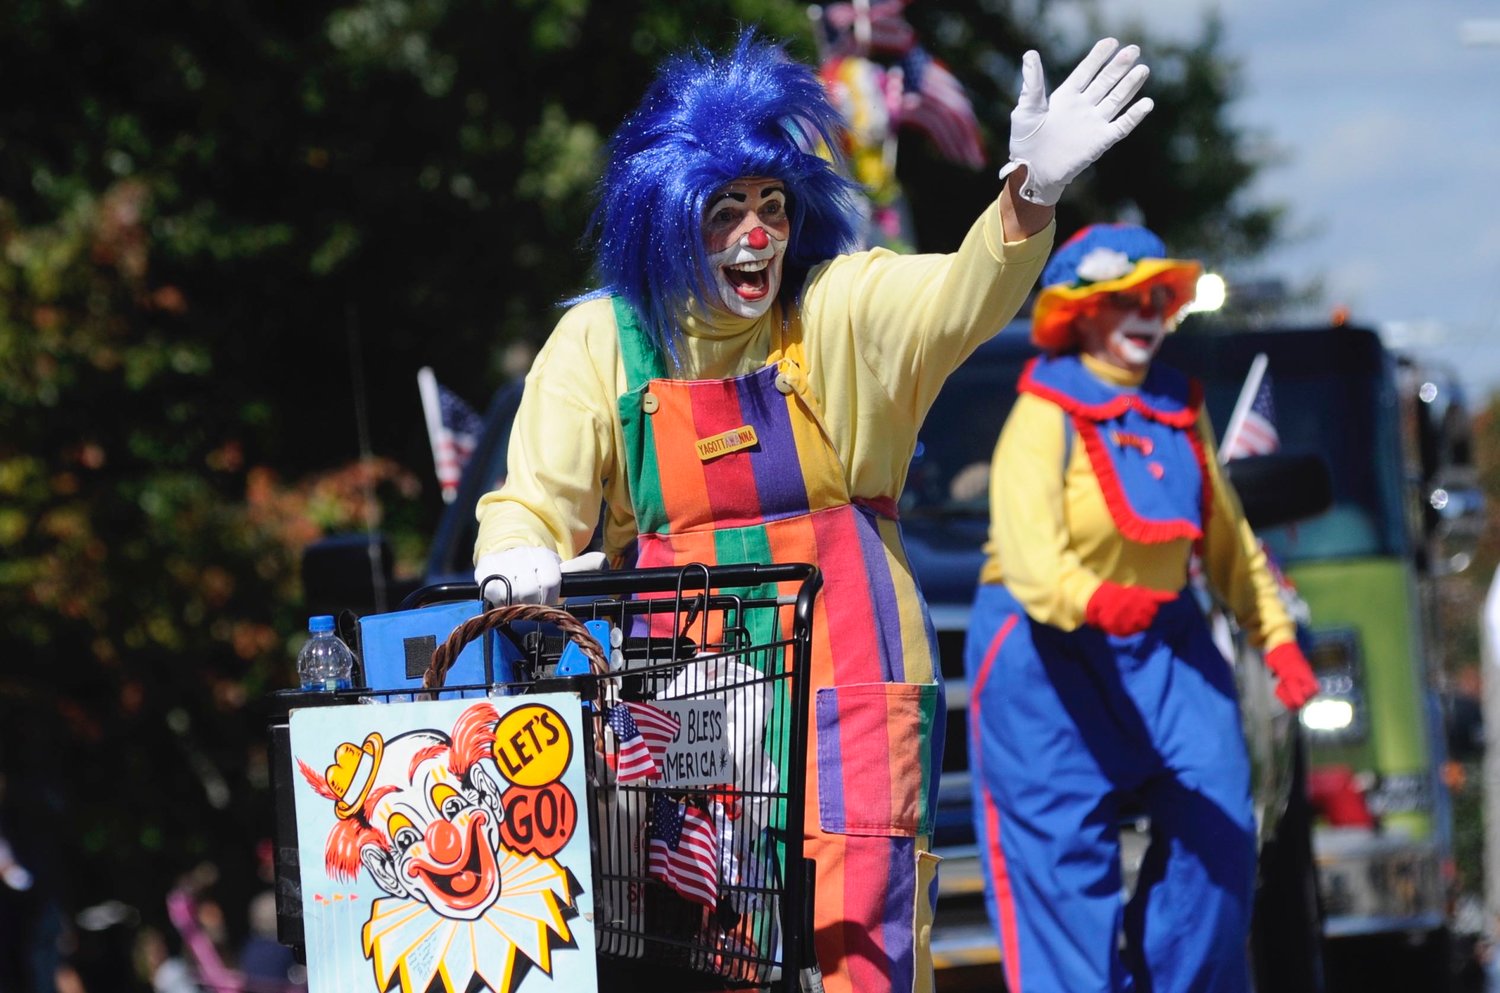 Here come the clowns. A troupe of clowns from Clown Fest ’93 in Seaside Heights, NJ delighted the crowds. As part of the act, six-six old Maggie Carlile and her five-year old brother Ethan were accompanied by “Gramma Mary Carlile.”